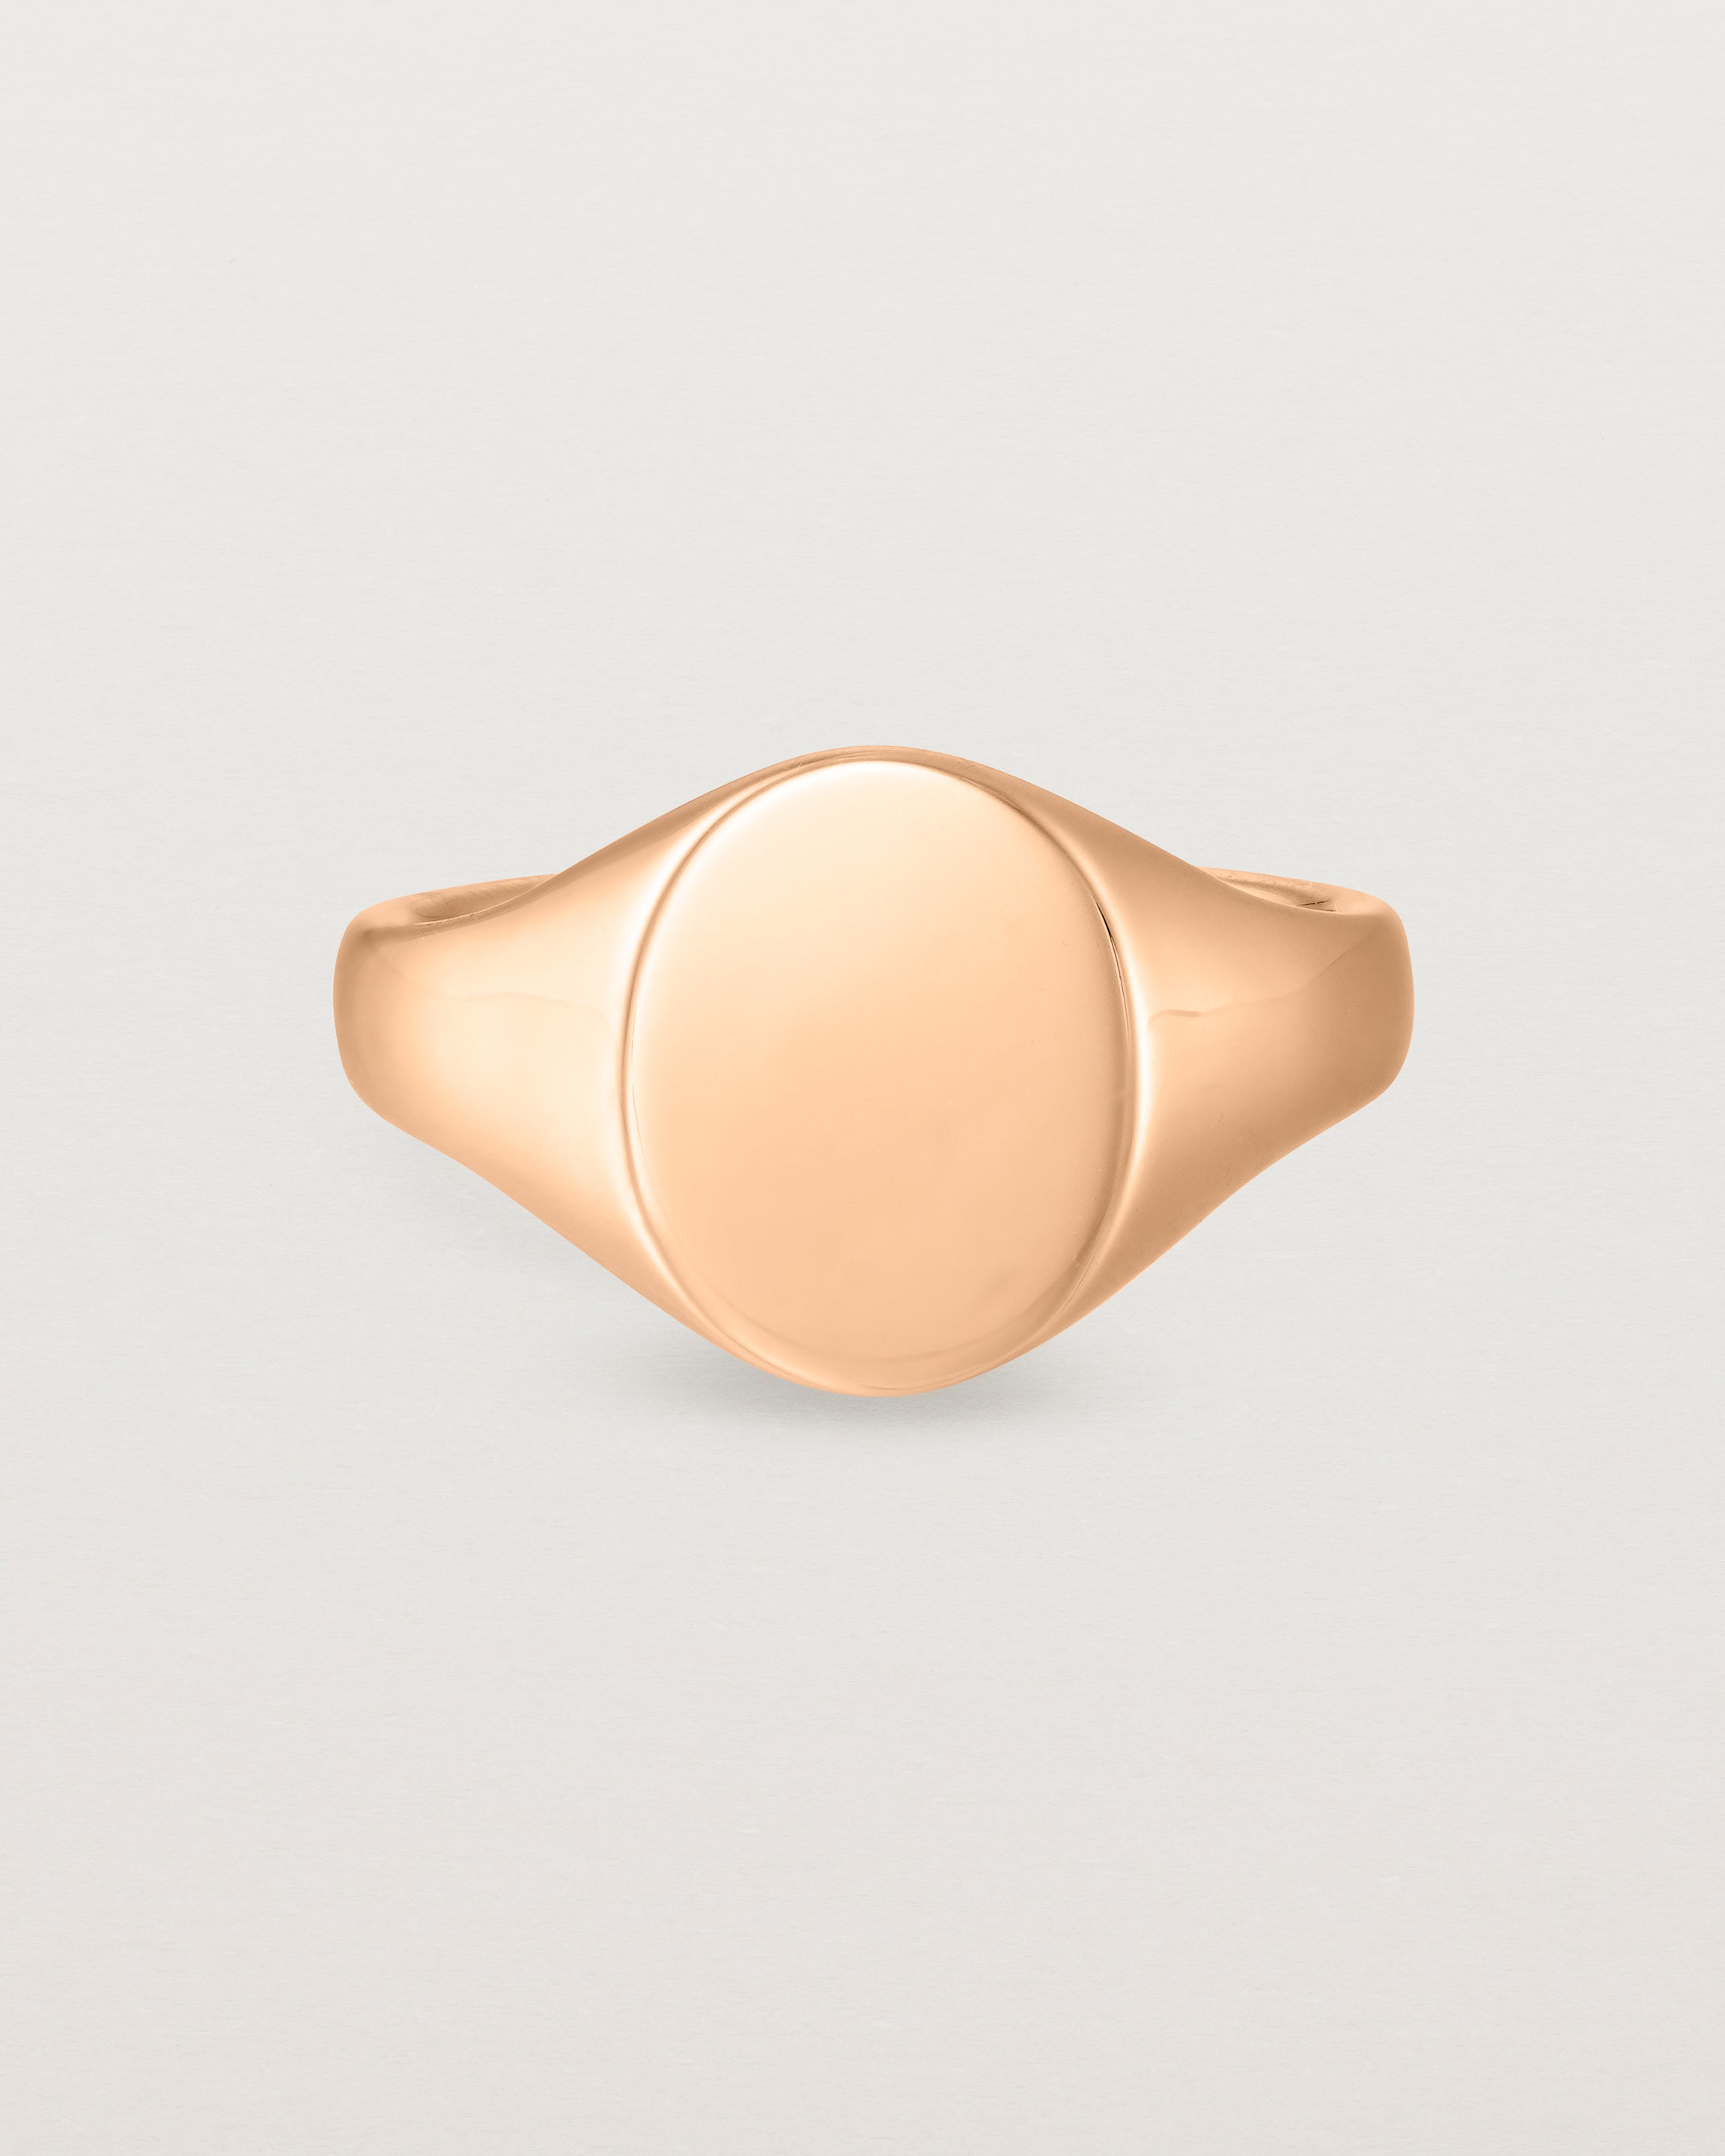 Front view of the Arden Signet Ring in Rose Gold.